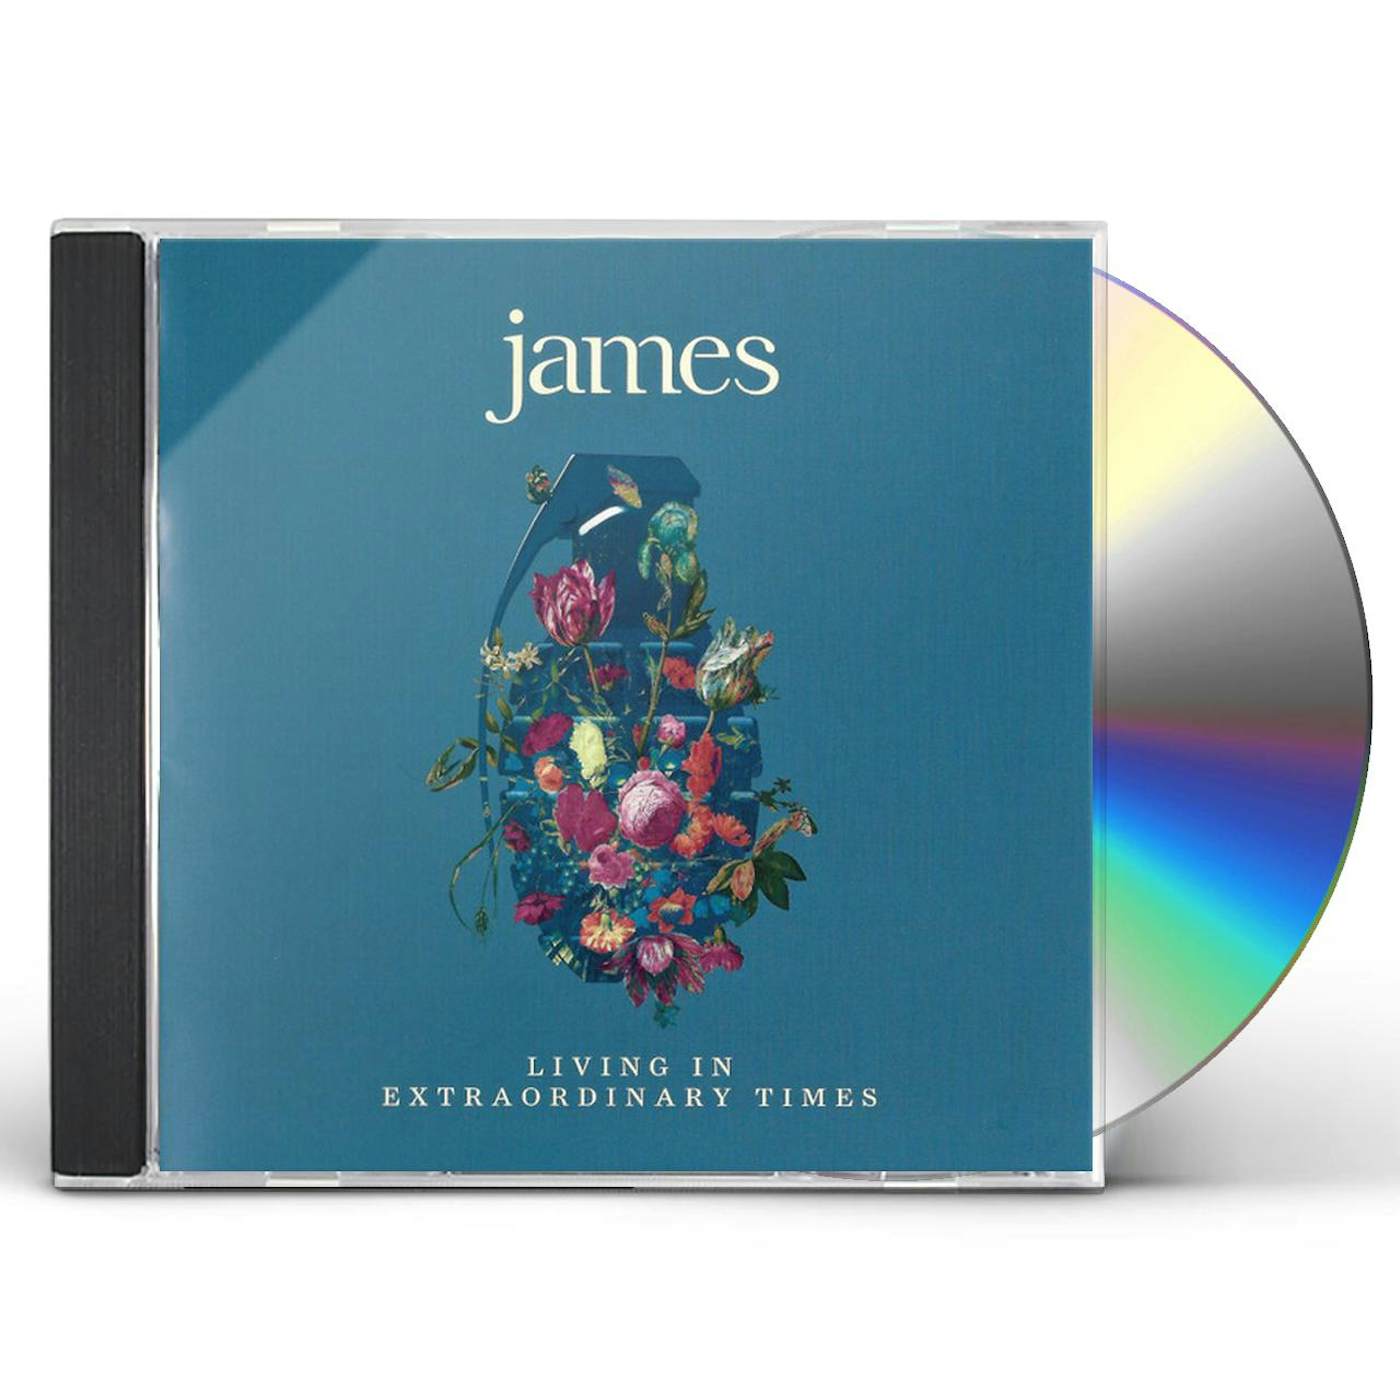 James LIVING IN EXTRAORDINARY TIMES CD